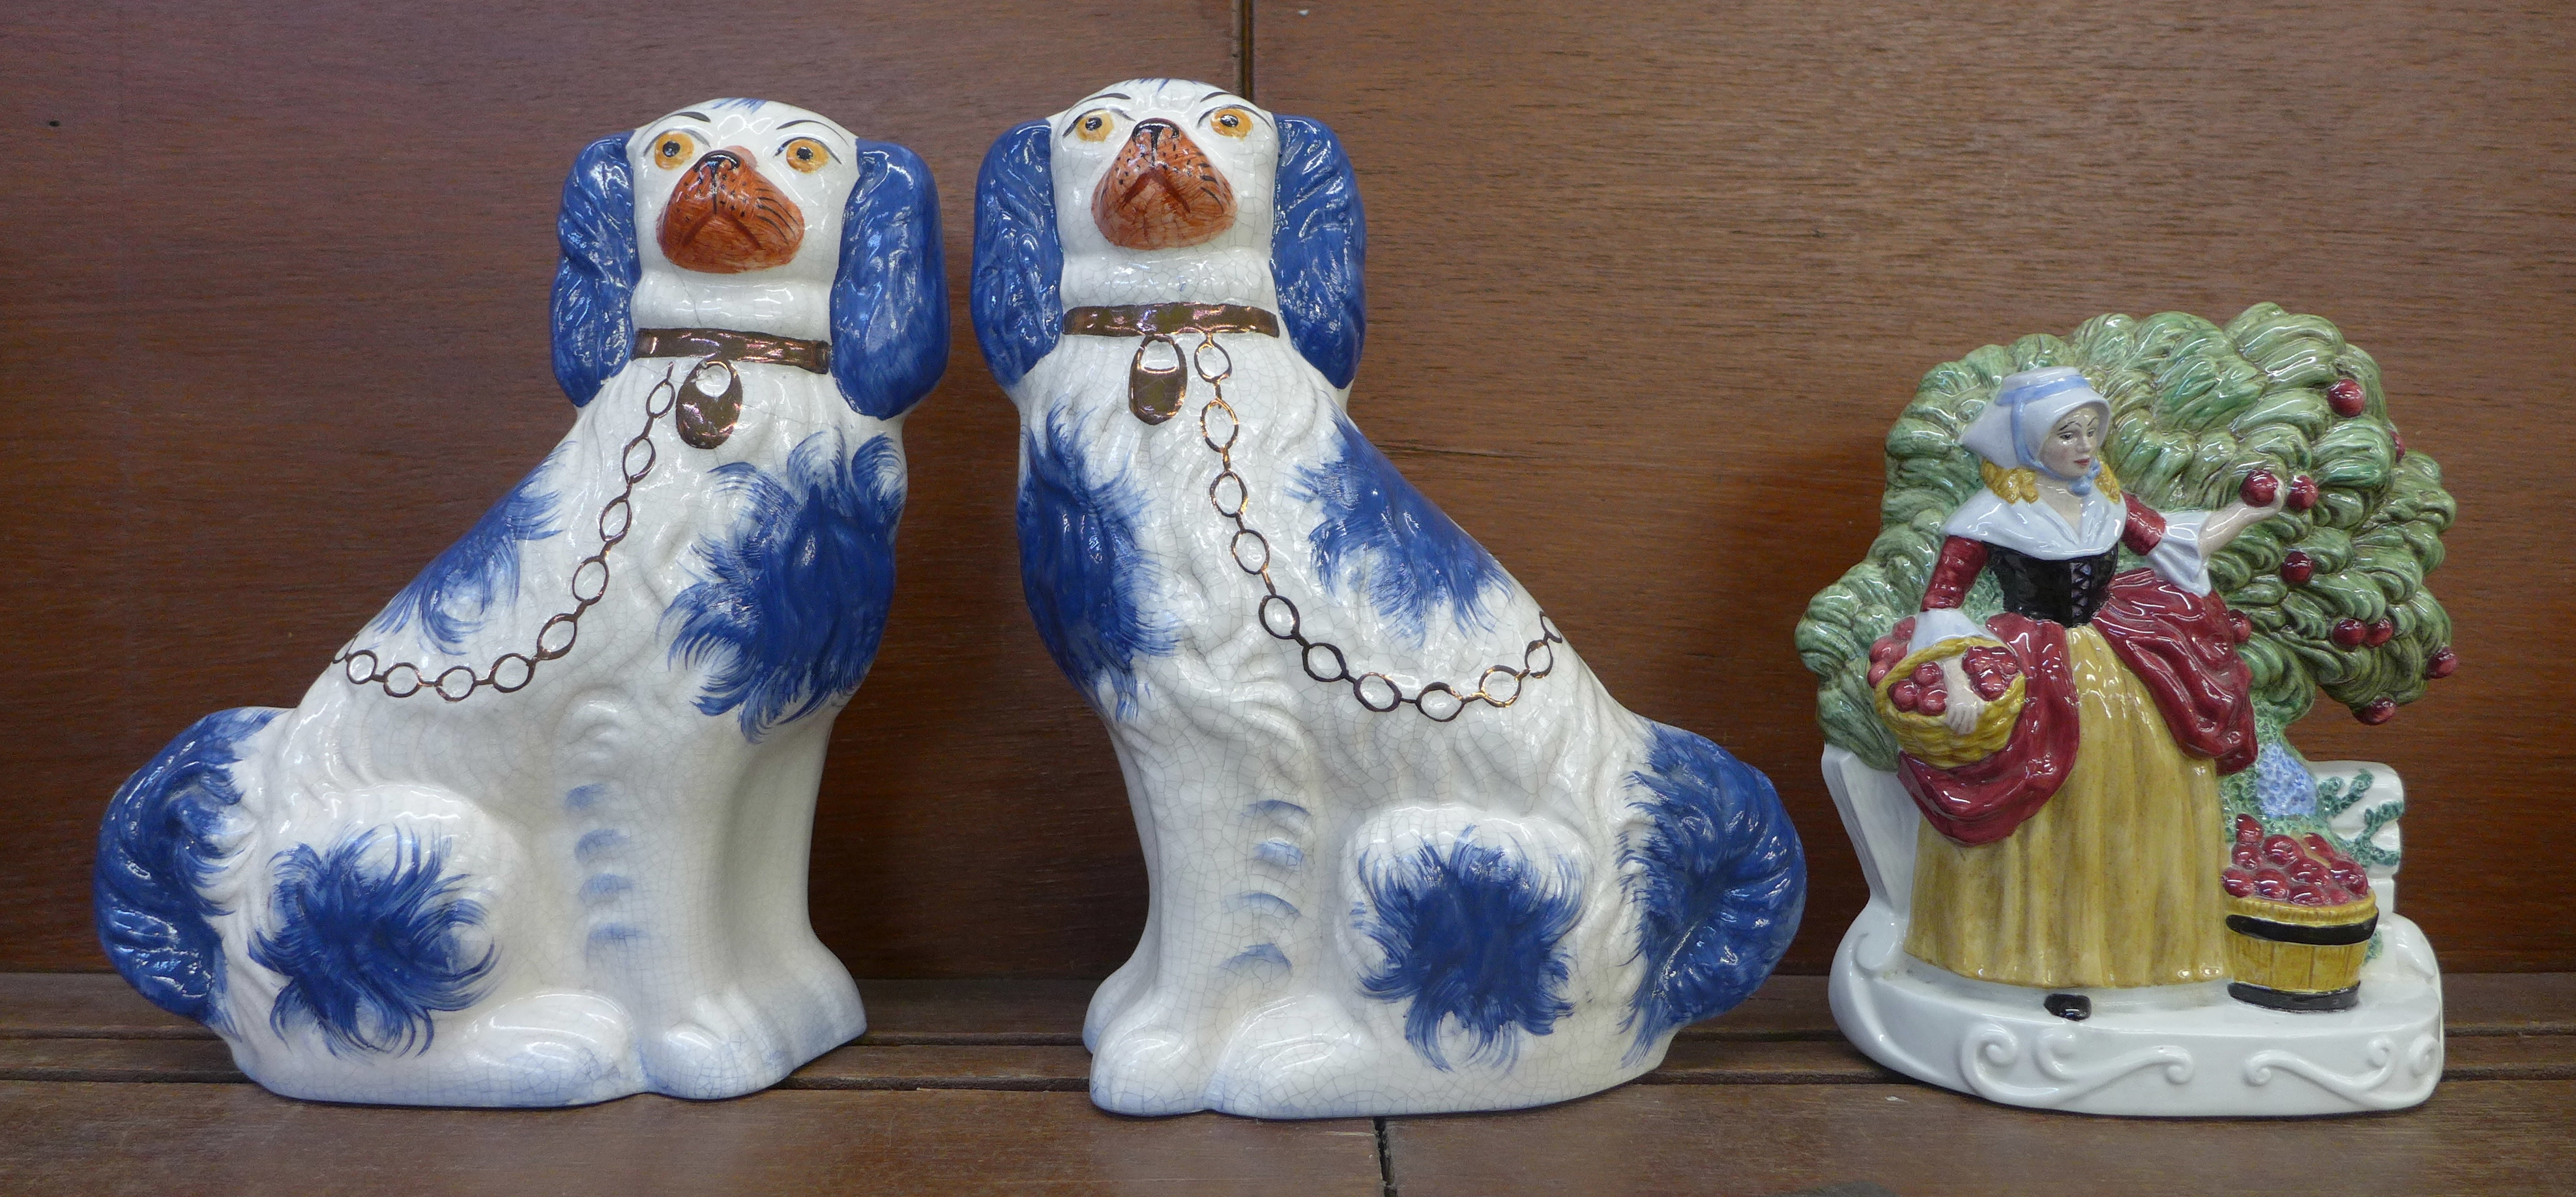 A pair of modern Staffordshire spaniels in blue colourway and a flatback figure